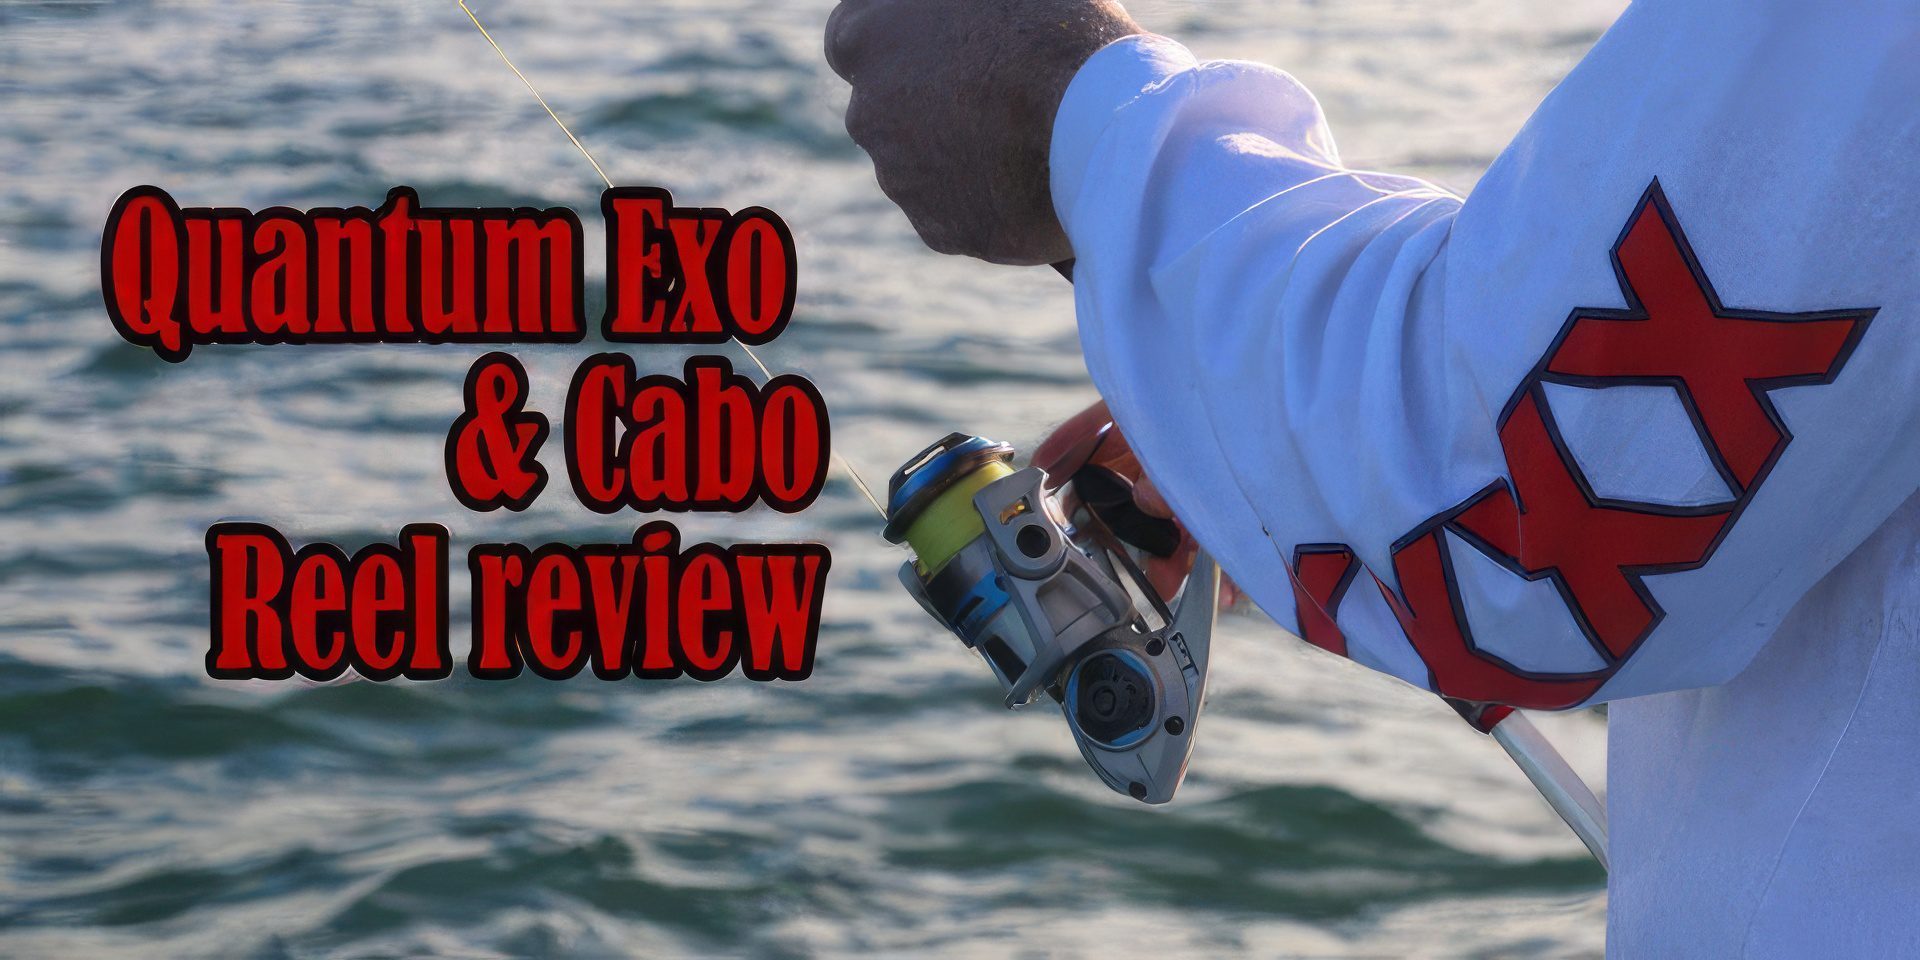 Quantum Exo and Cabo reel review - Ryan Moody Fishing